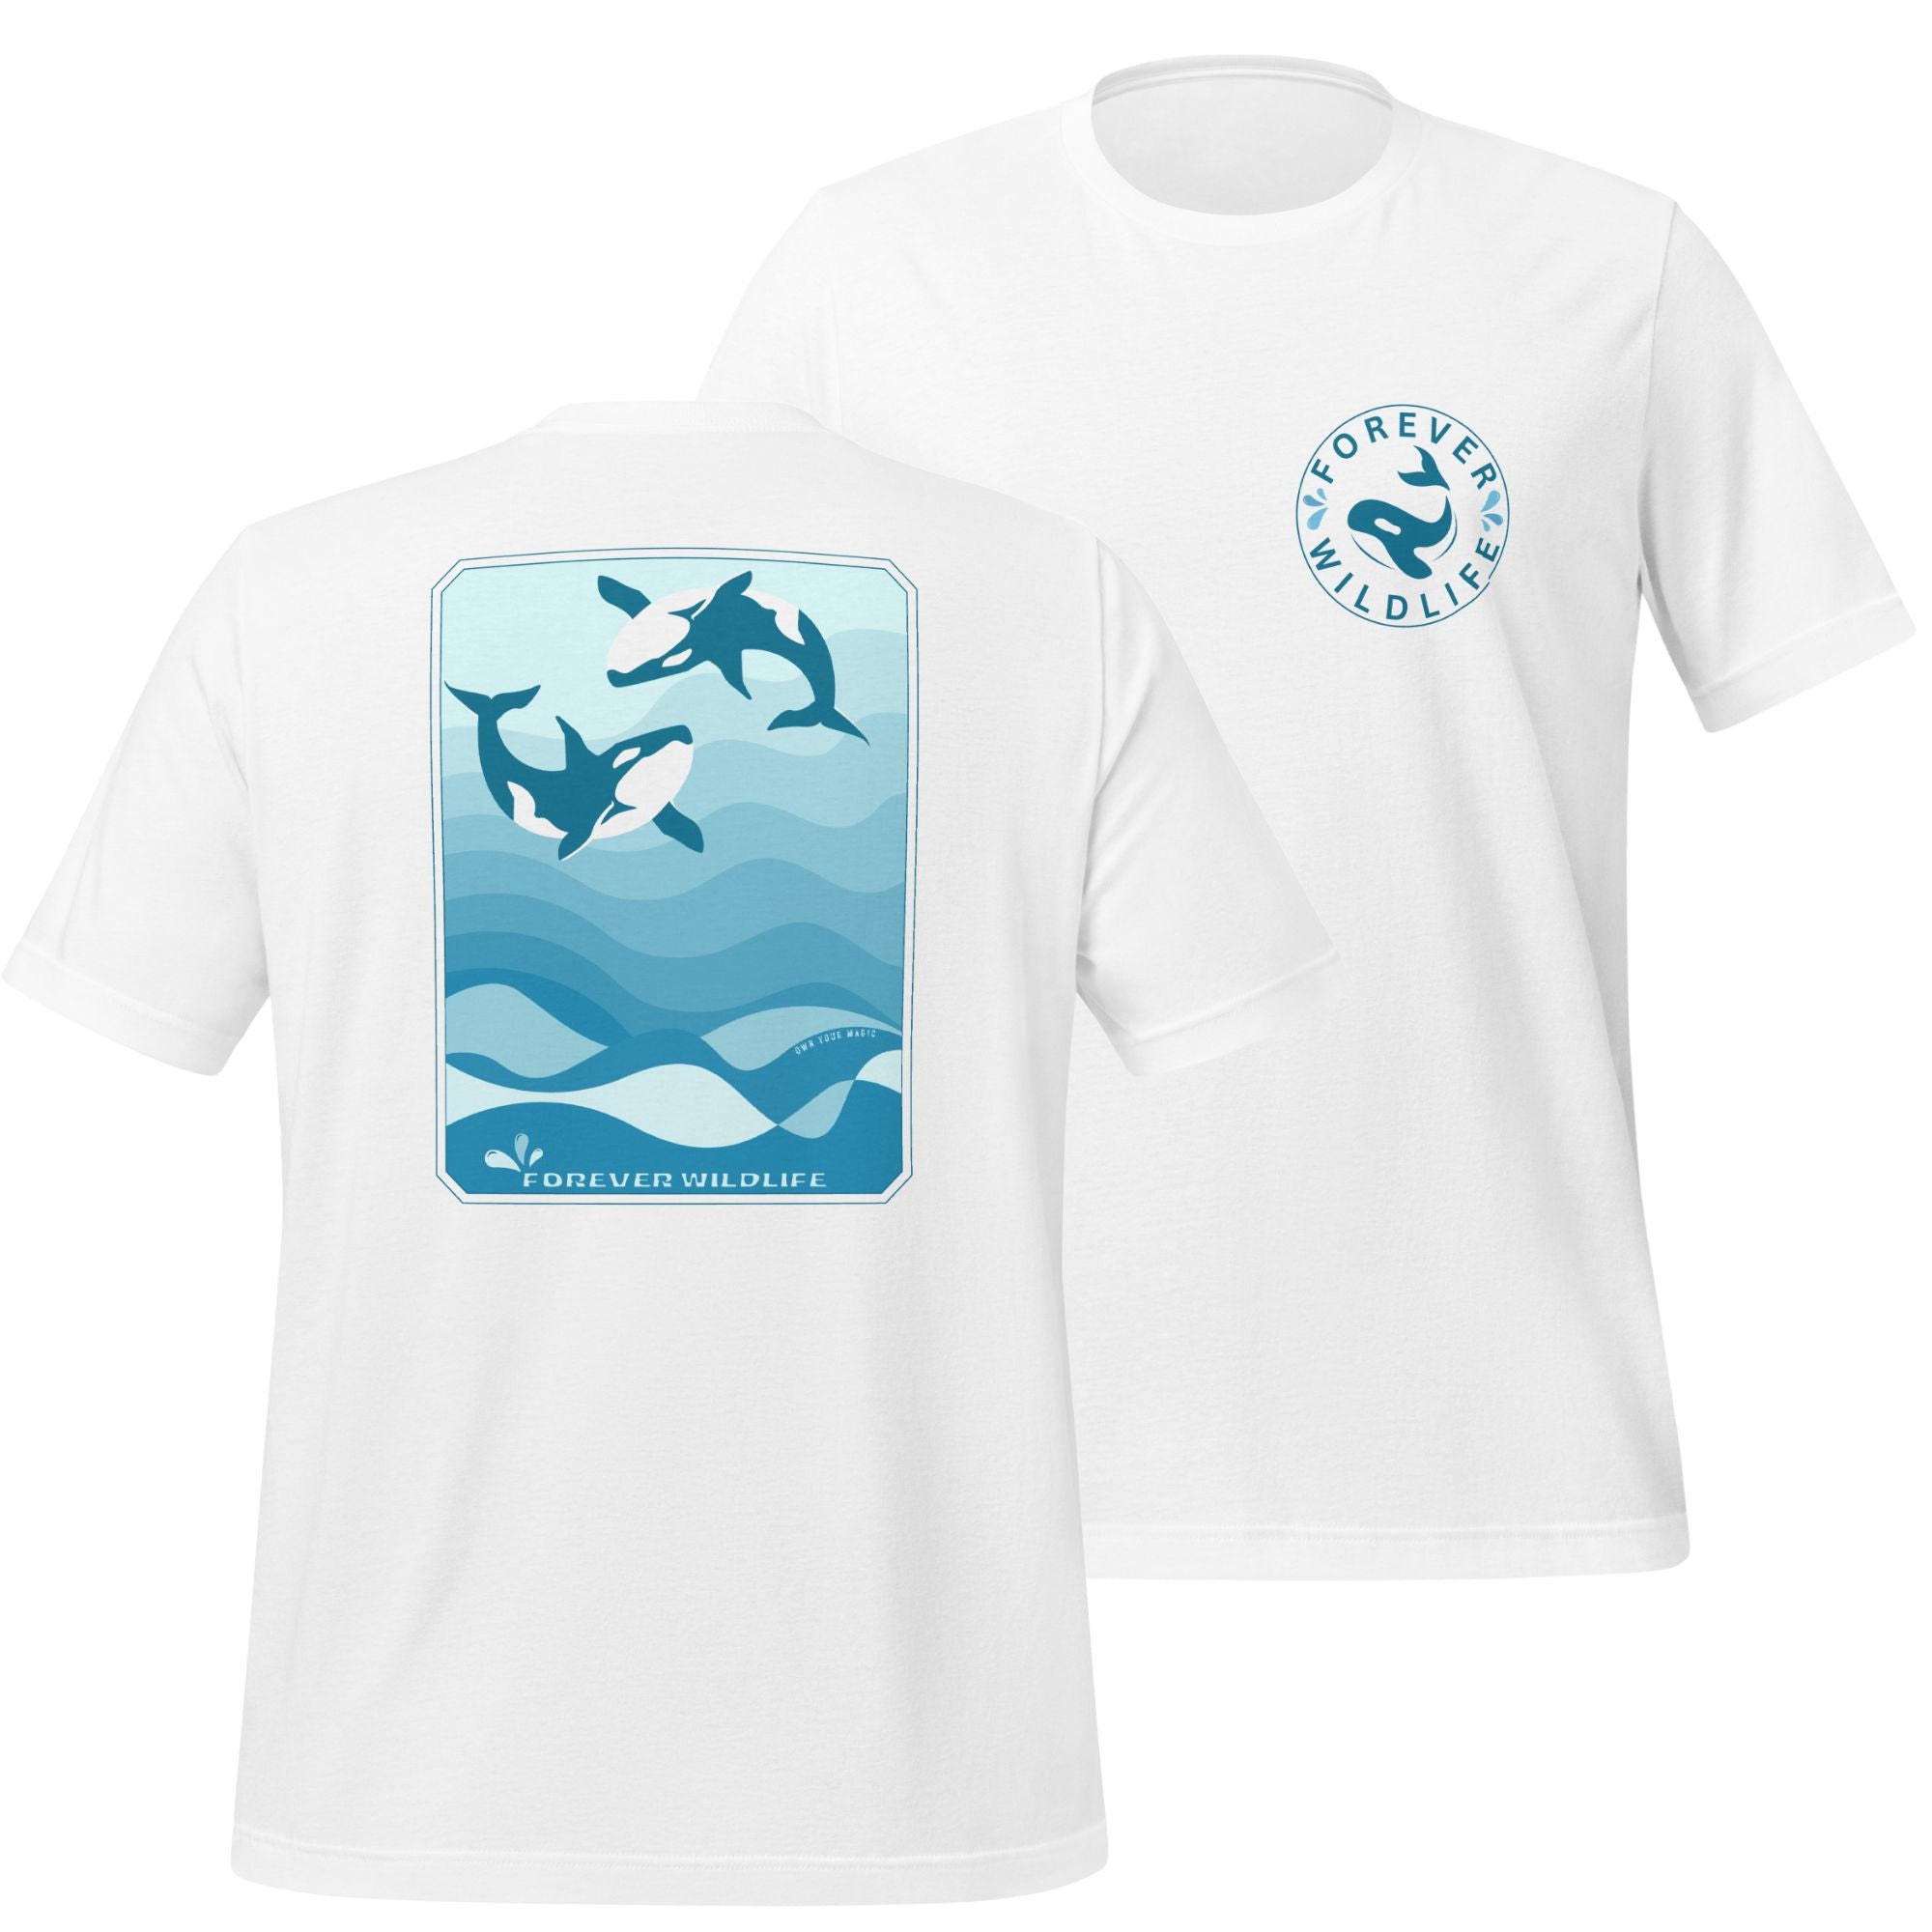 Orca Shirt, beautiful White Orca T-Shirt with Killer Whales on the shirt by Forever Wildlife selling Wildlife T Shirts.